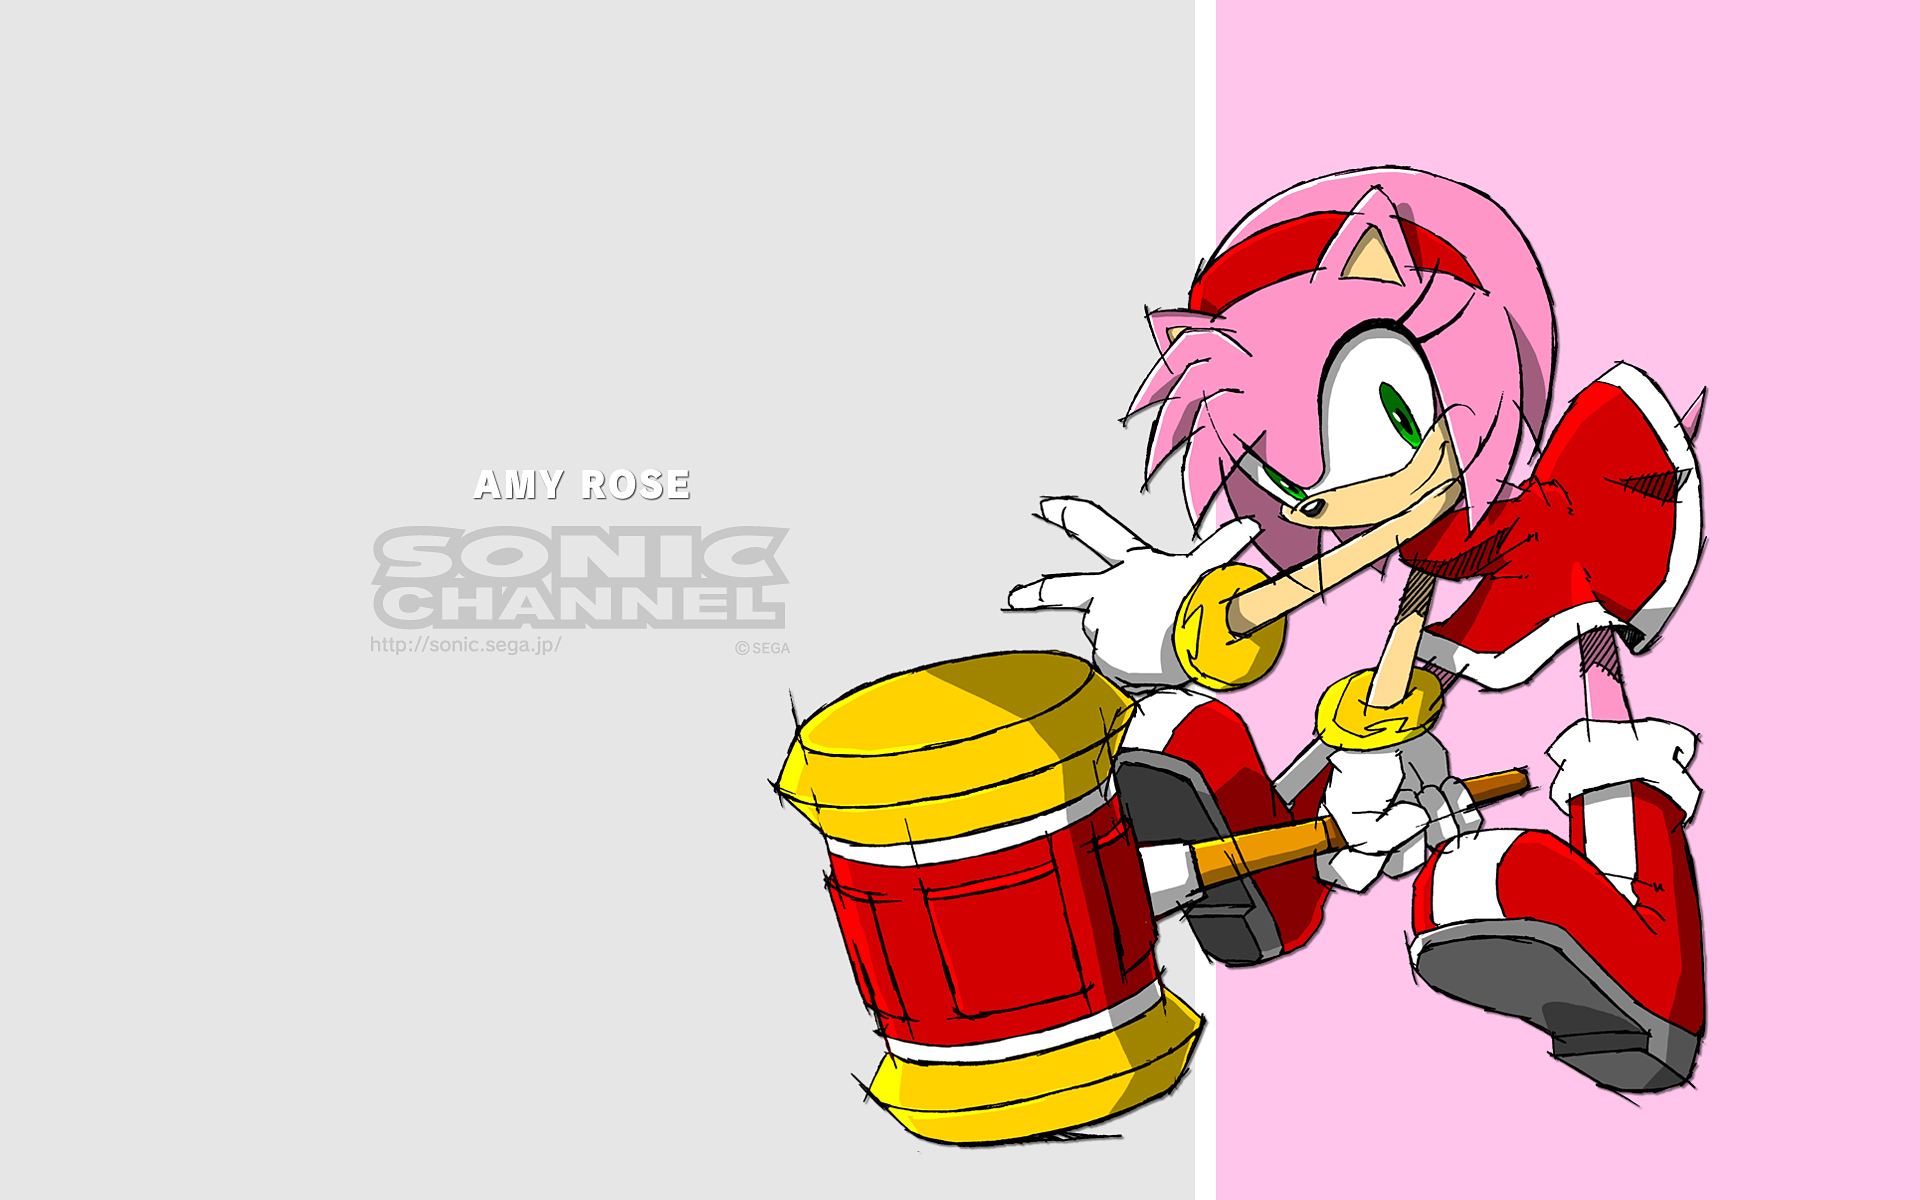 video game, sonic the hedgehog, amy rose, piko piko hammer, sonic channel, sonic